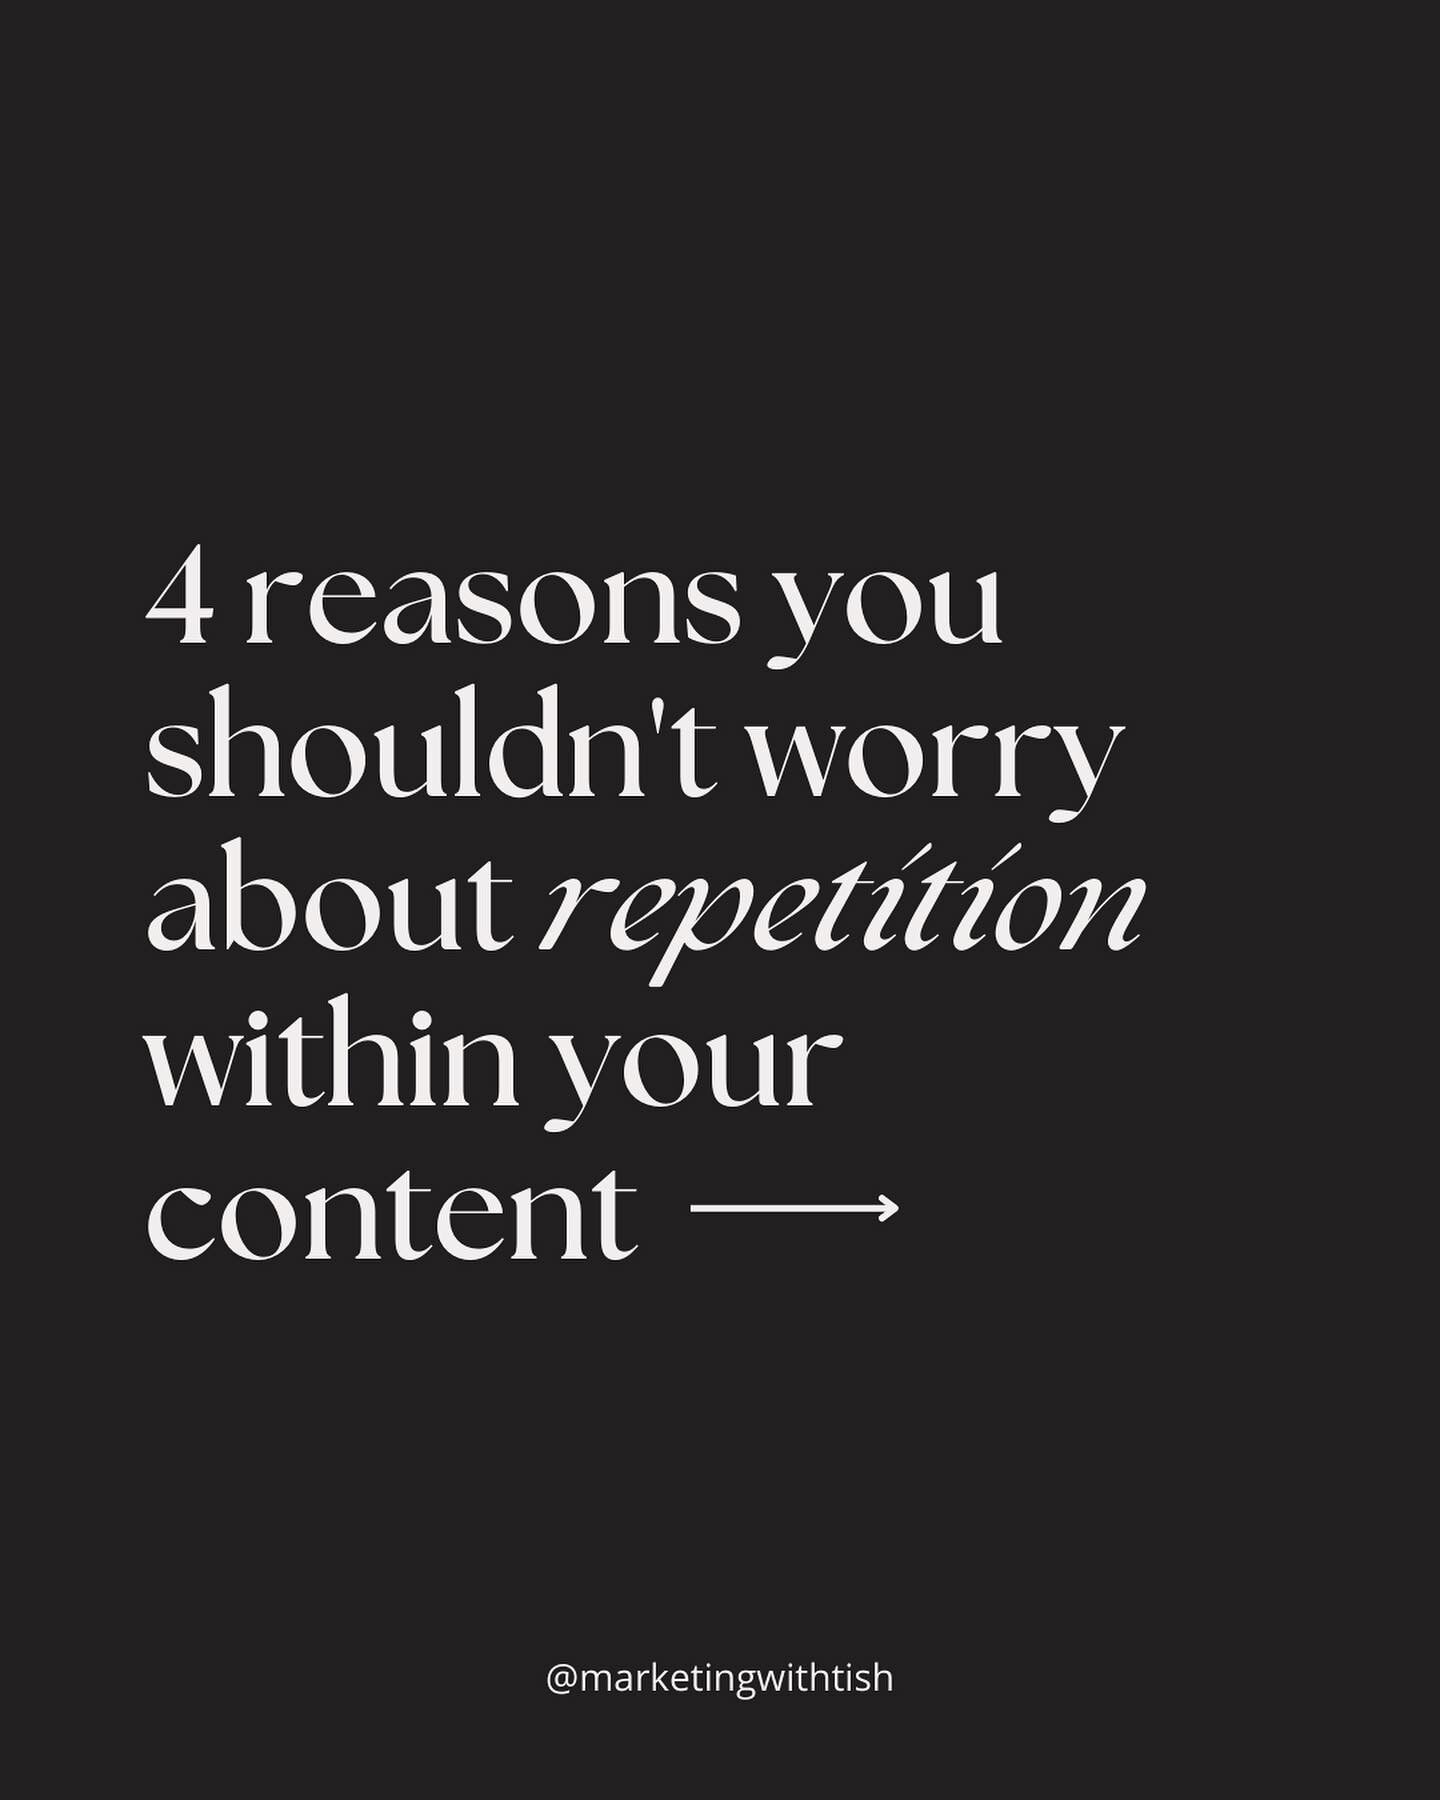 Let&rsquo;s set the record straight.&nbsp;

Content repurposing is NOT about you copying and pasting the exact same thing across different platforms, or the same platforms after a few months have passed.

When you repurpose your content, you should b